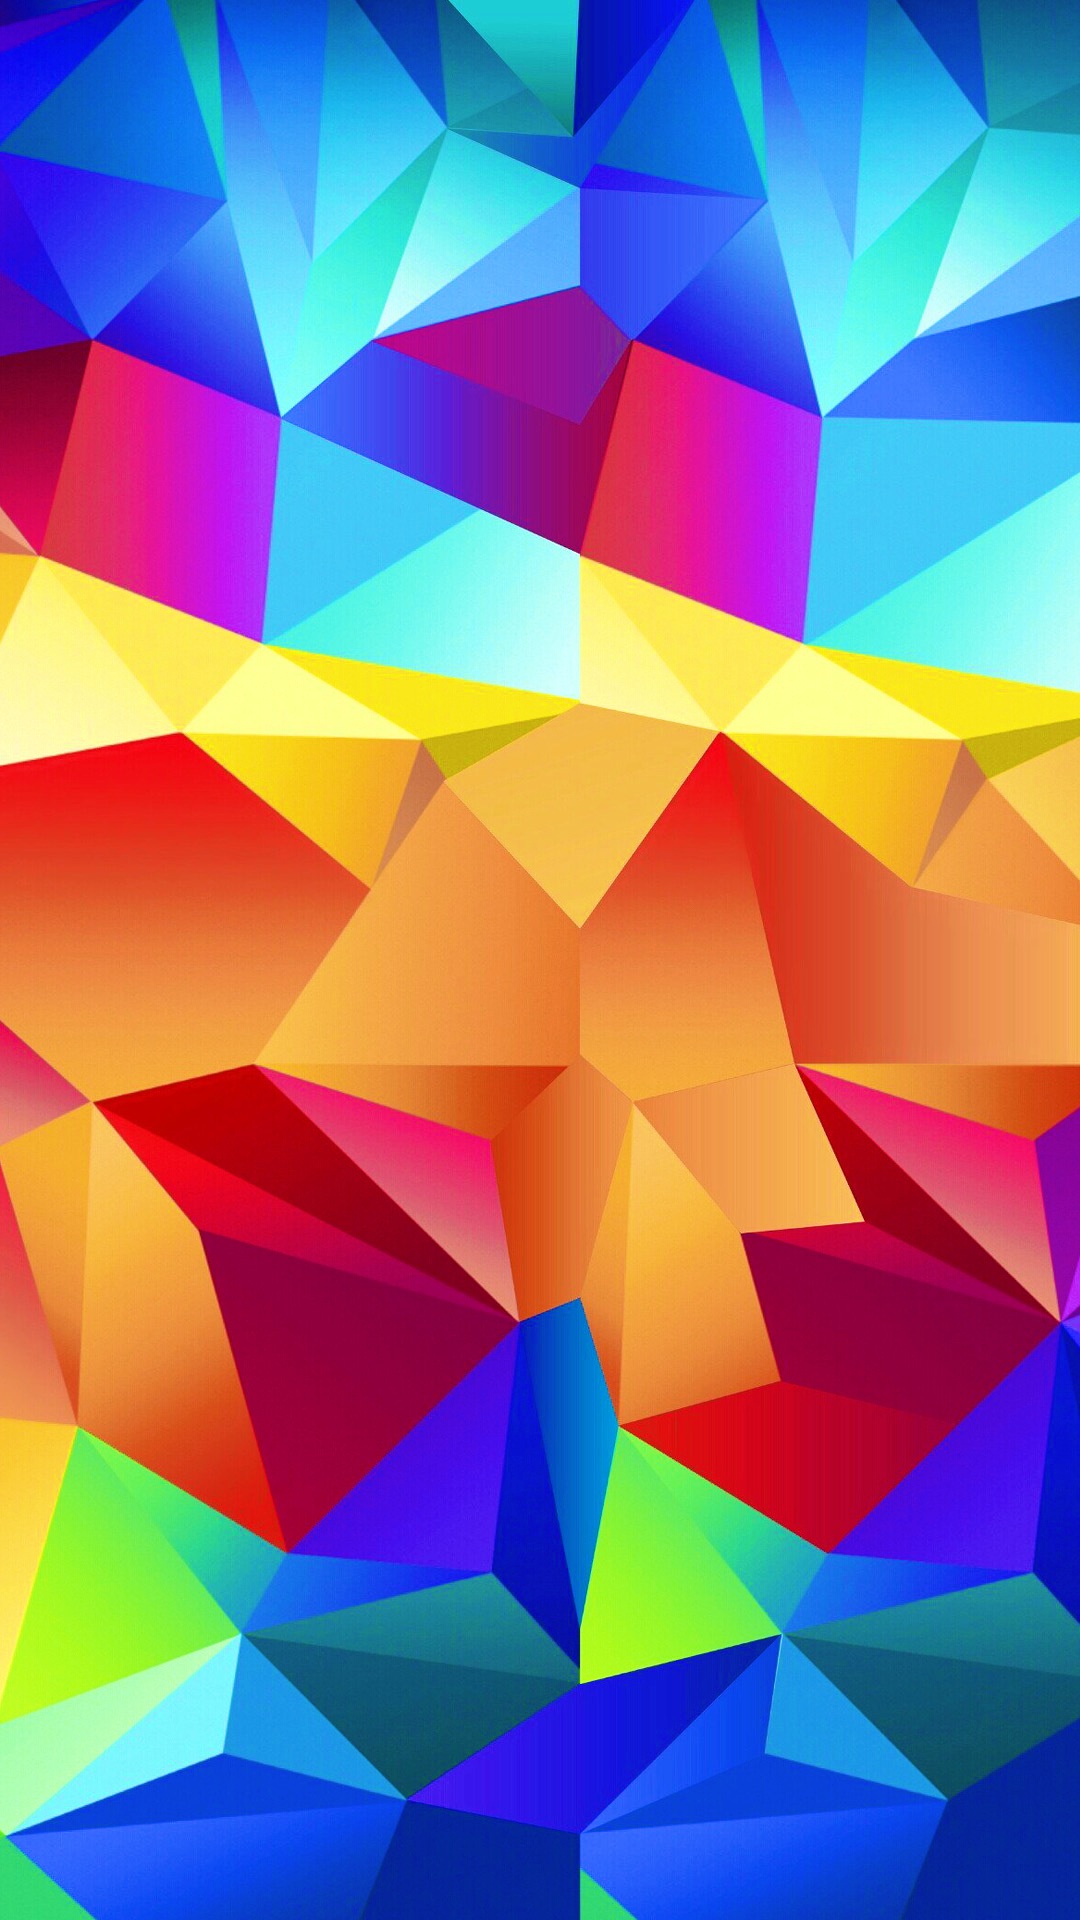 wallpapers for mobile phones,colorfulness,pattern,graphic design,design,symmetry